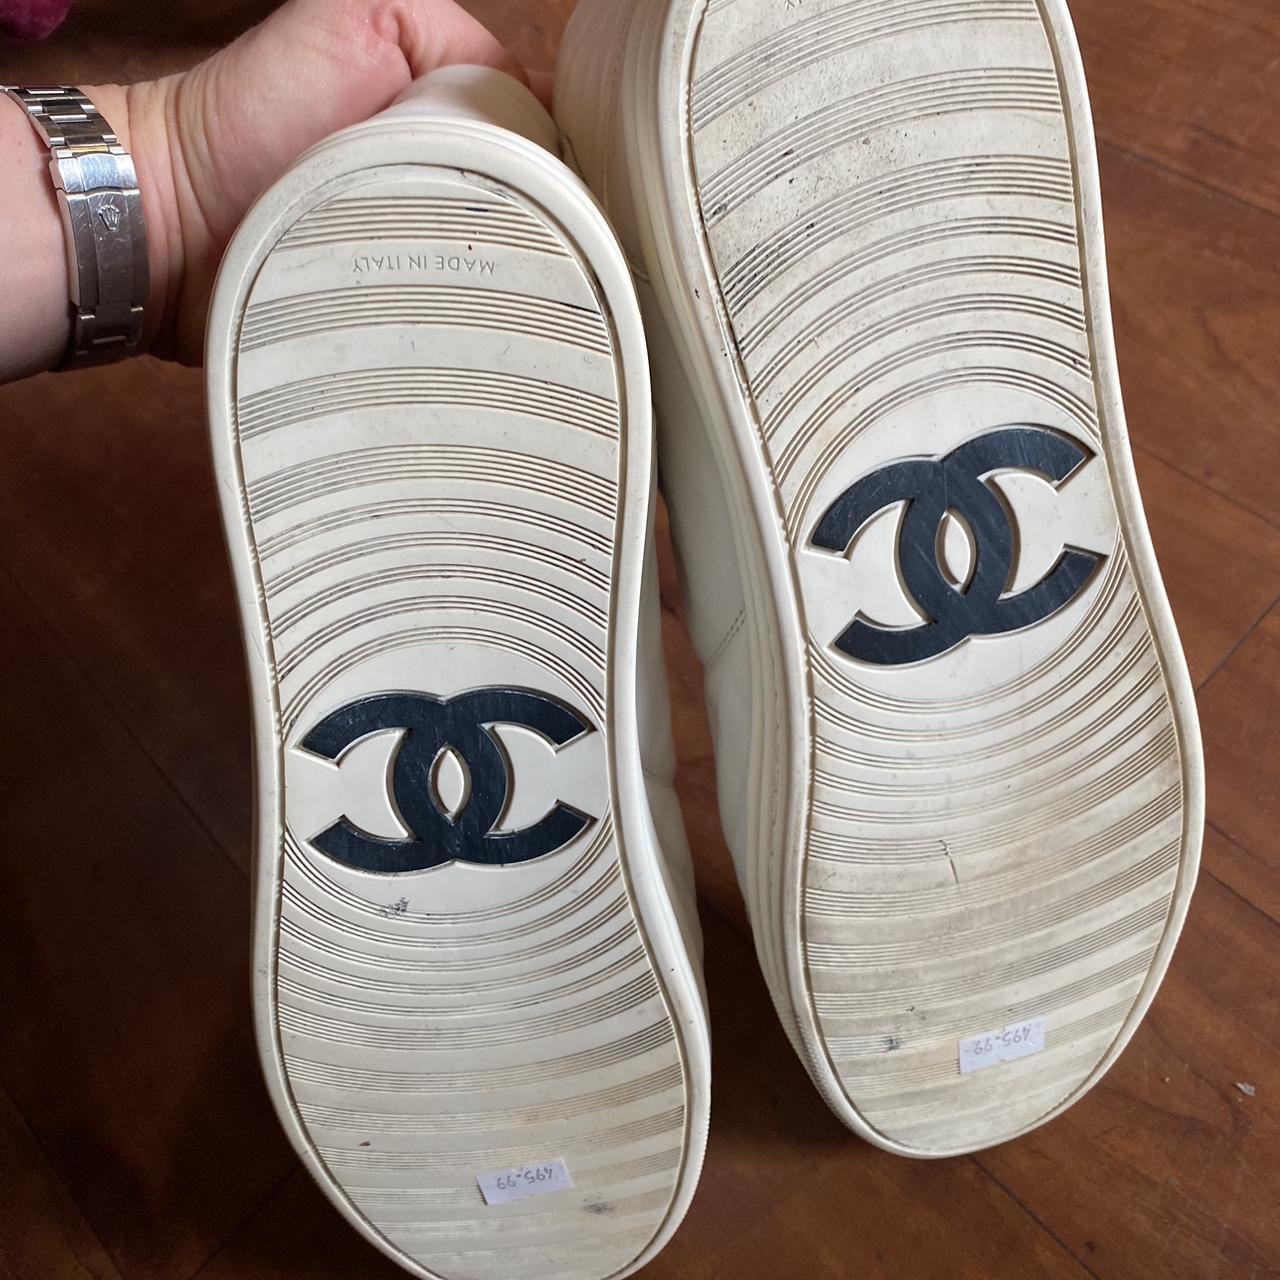 Authentic chanel sneakers for men withe color